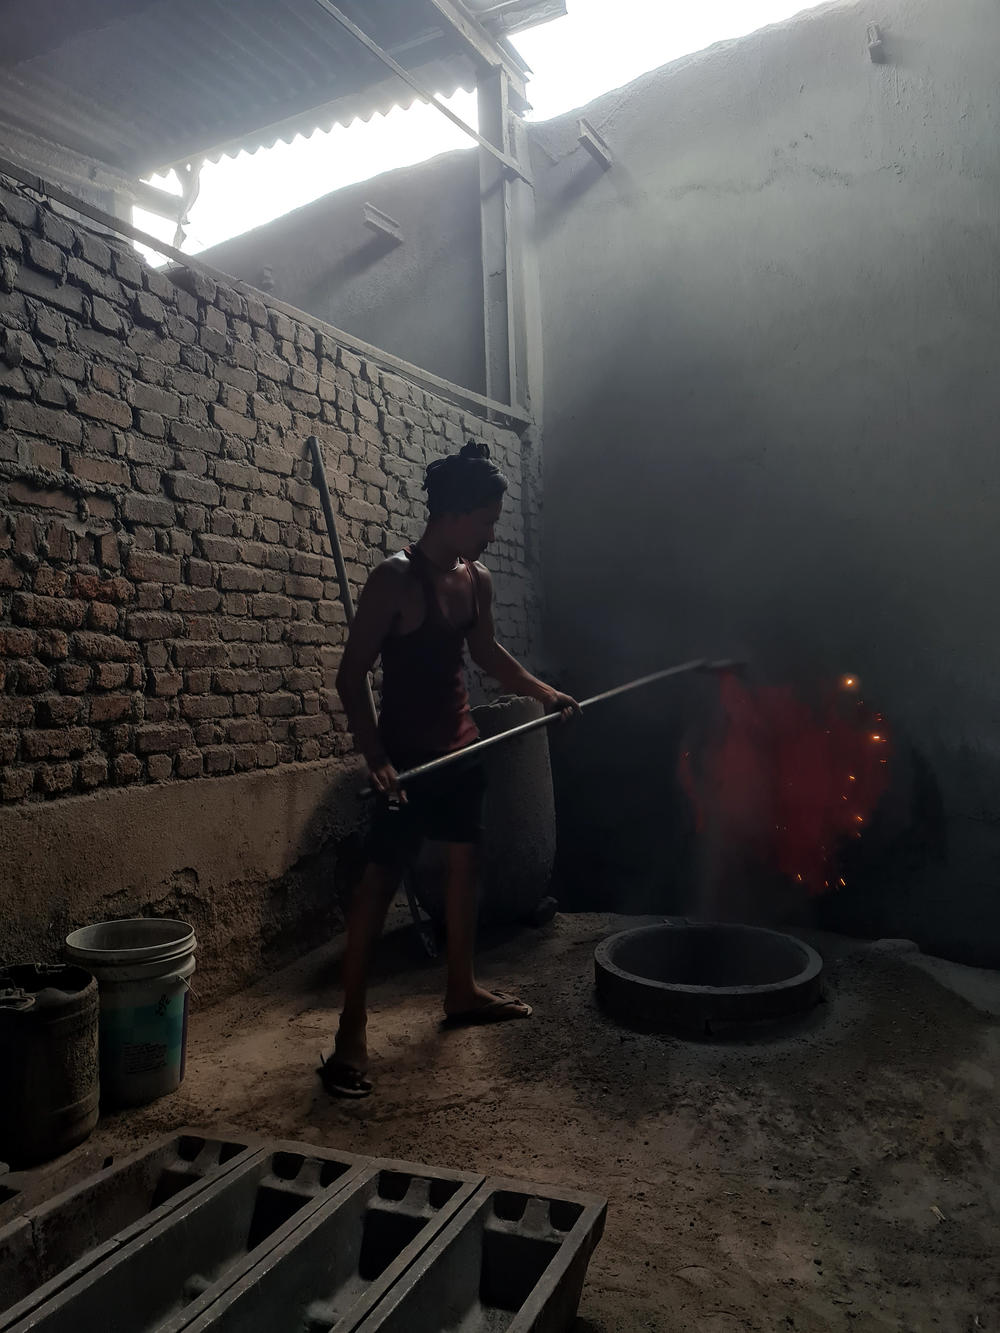 A worker melts aluminum over an open coal fire at a metal workshop around the corner from the Choudhary Coal Depot in Mumbai.